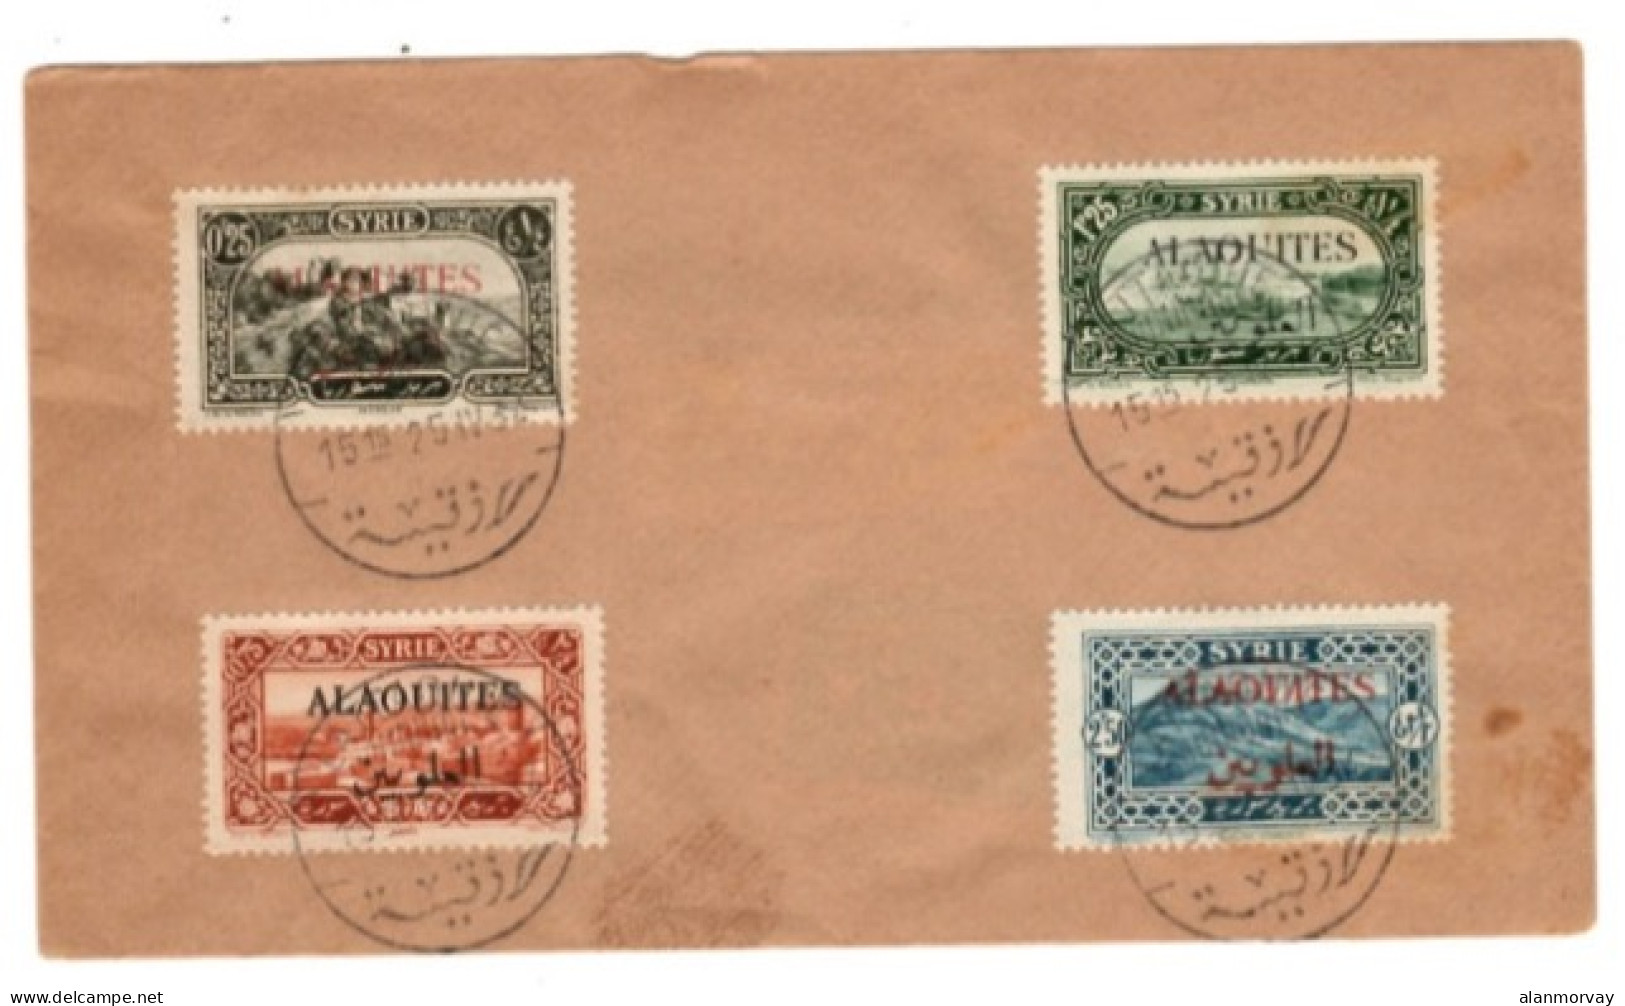 Syria / Alaouites - April 25, 1937 Unaddressed Philatelic Cover - Covers & Documents